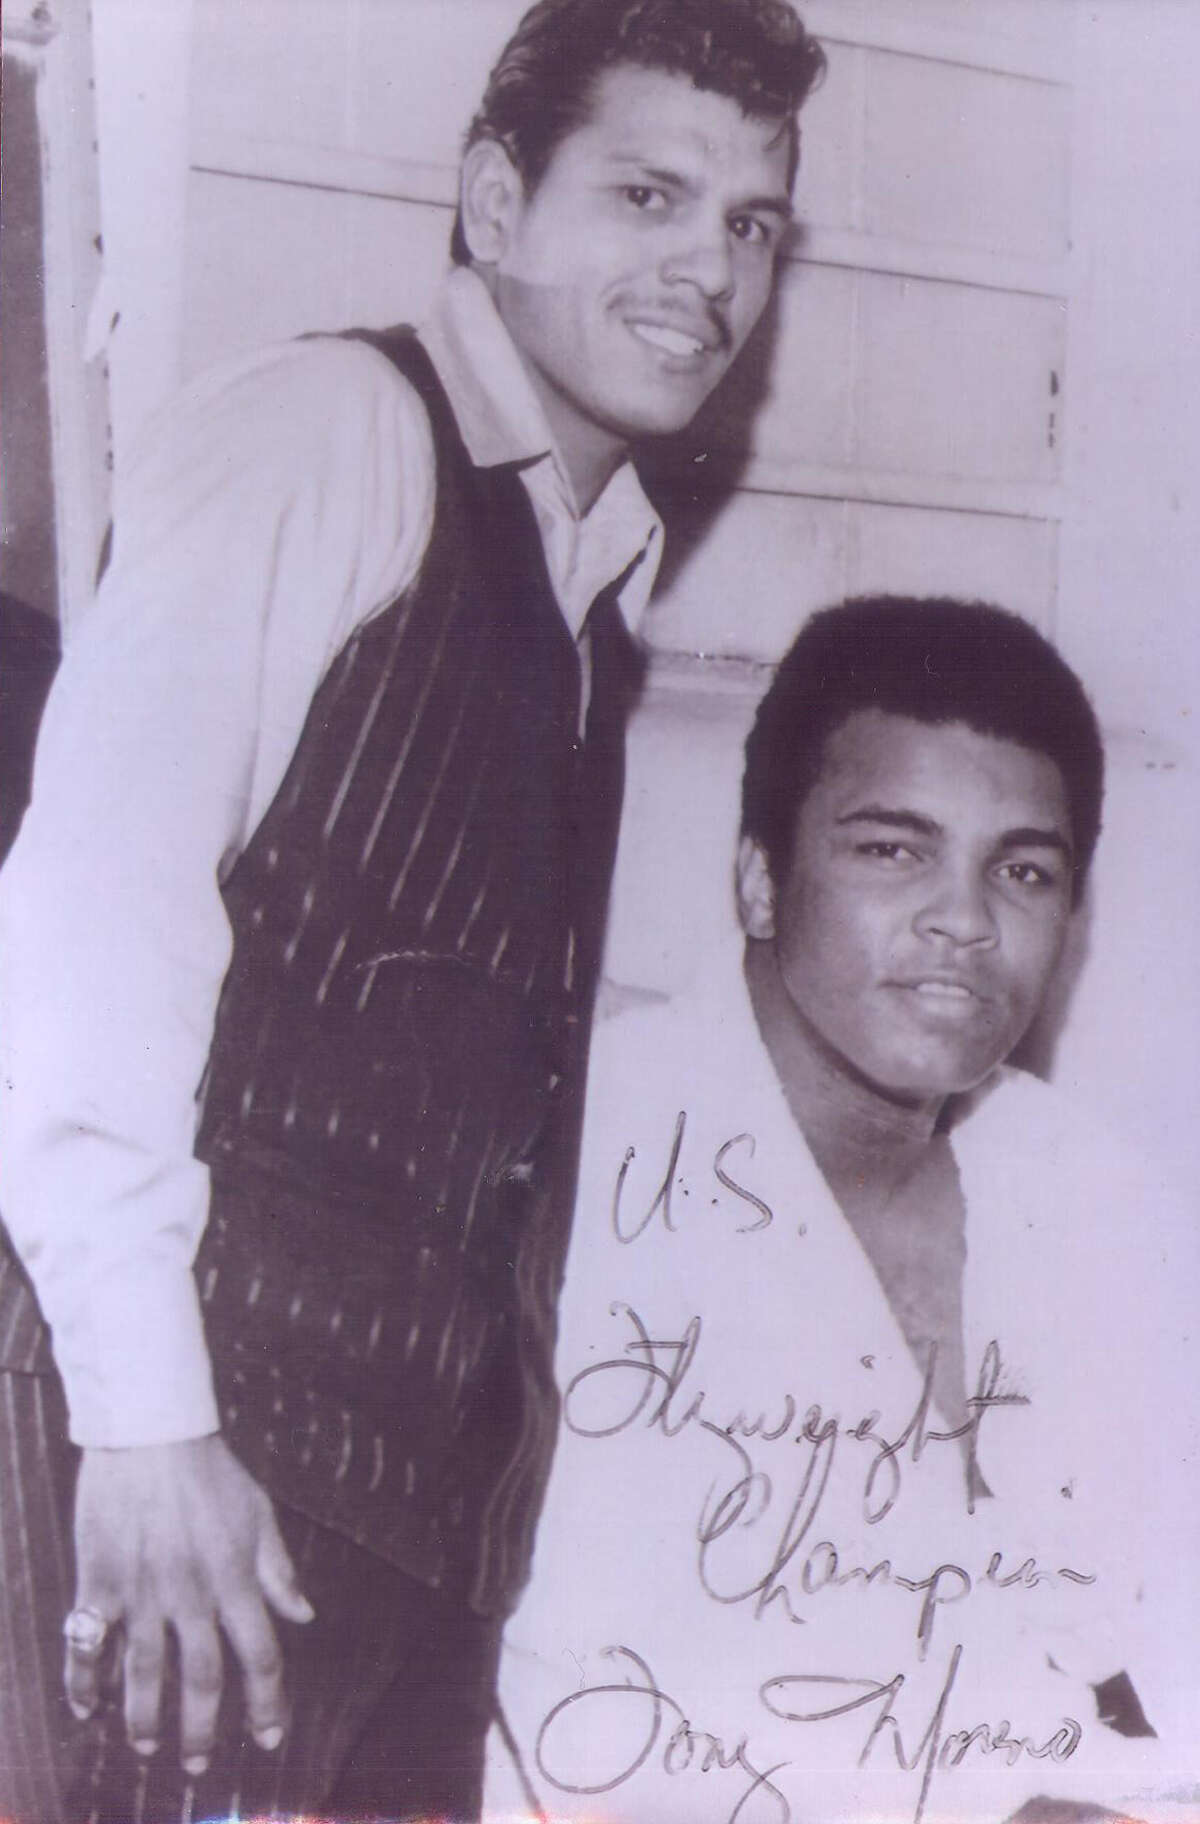 Tony Moreno is pictured with Muhammed Ali during a 1972 appearance in San Antonio.